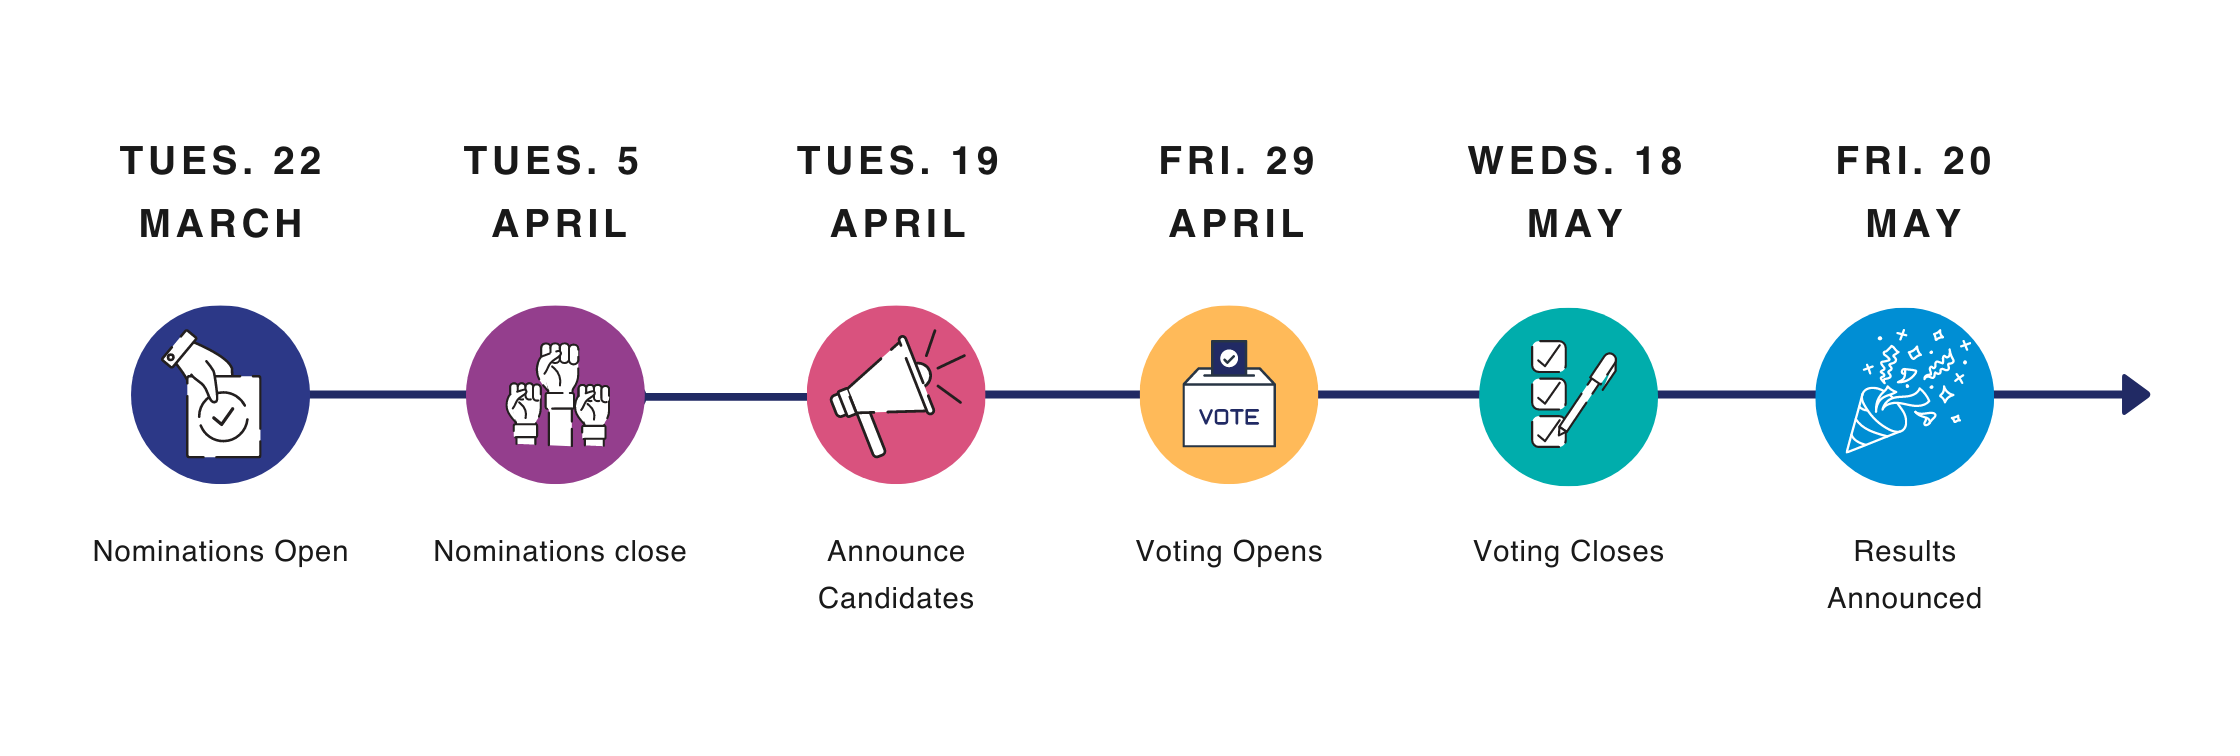 A timeline of important dates for election. Tues 22 March nominations open. Tues. 5 April Nominations close. Tues. 19 April Candidates Announced. fri 29 April Voting Opens. Weds 18 May voting closes. Fri 20 May, Results announced.